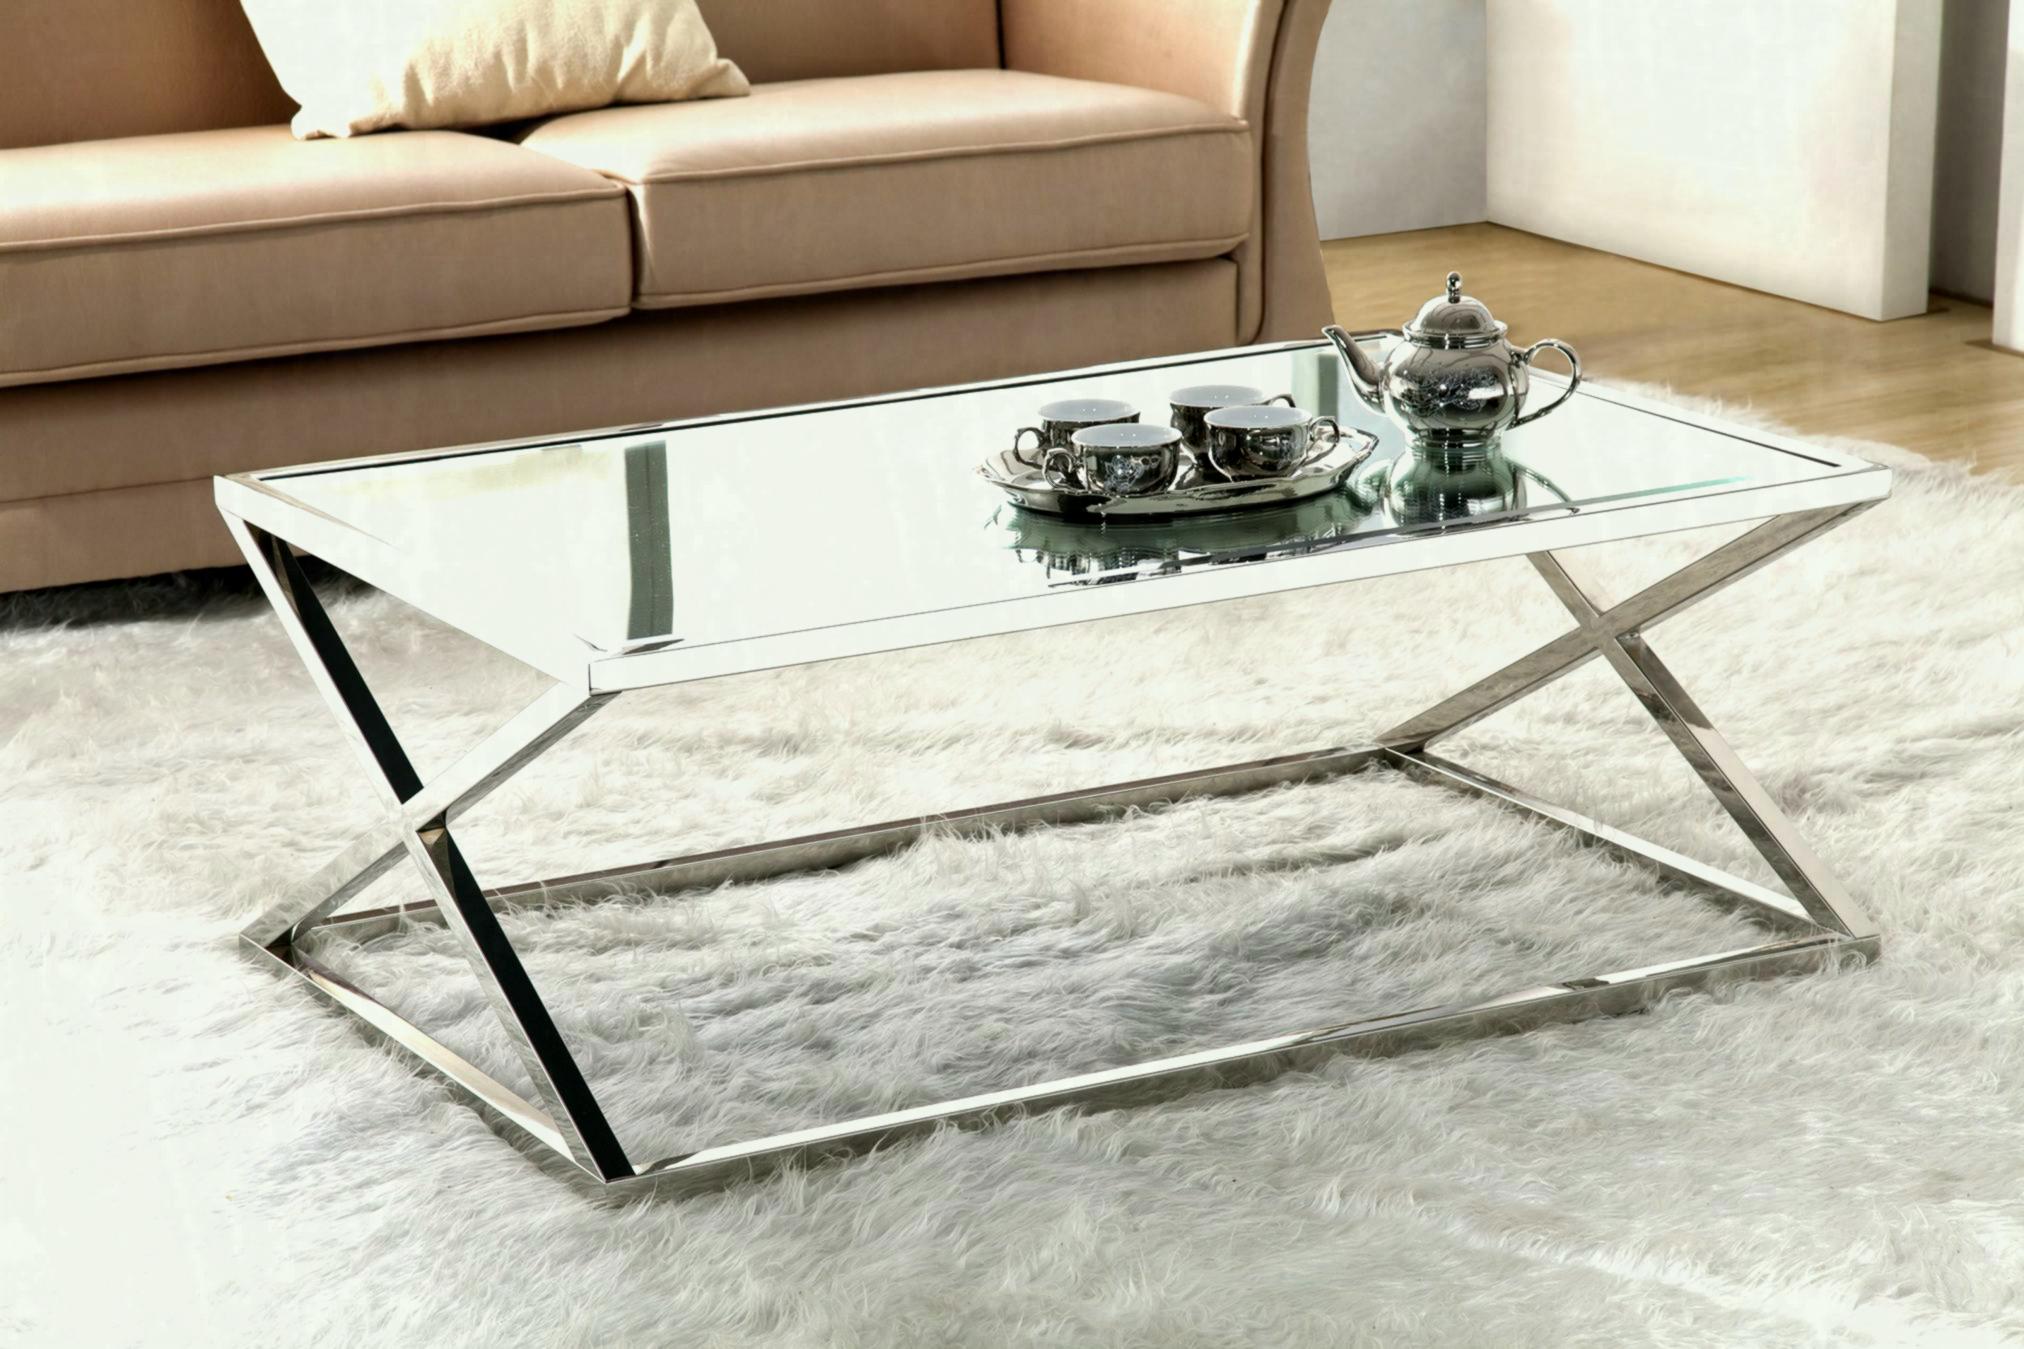 wood and glass coffee table designs photo - 8